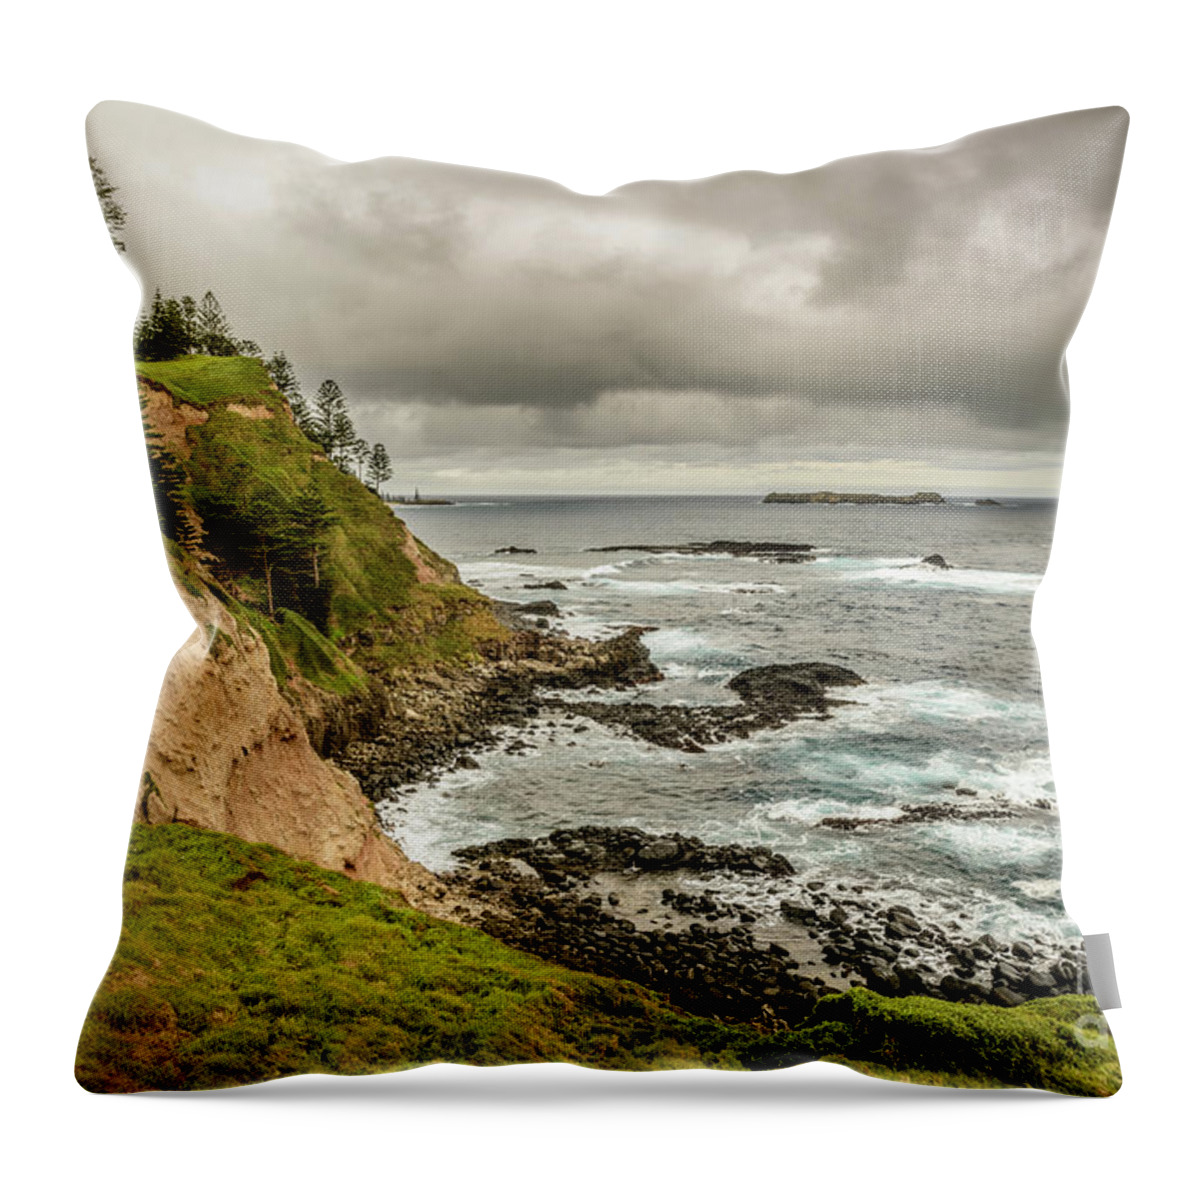 Landscape Throw Pillow featuring the photograph Ross Point 1 by Werner Padarin